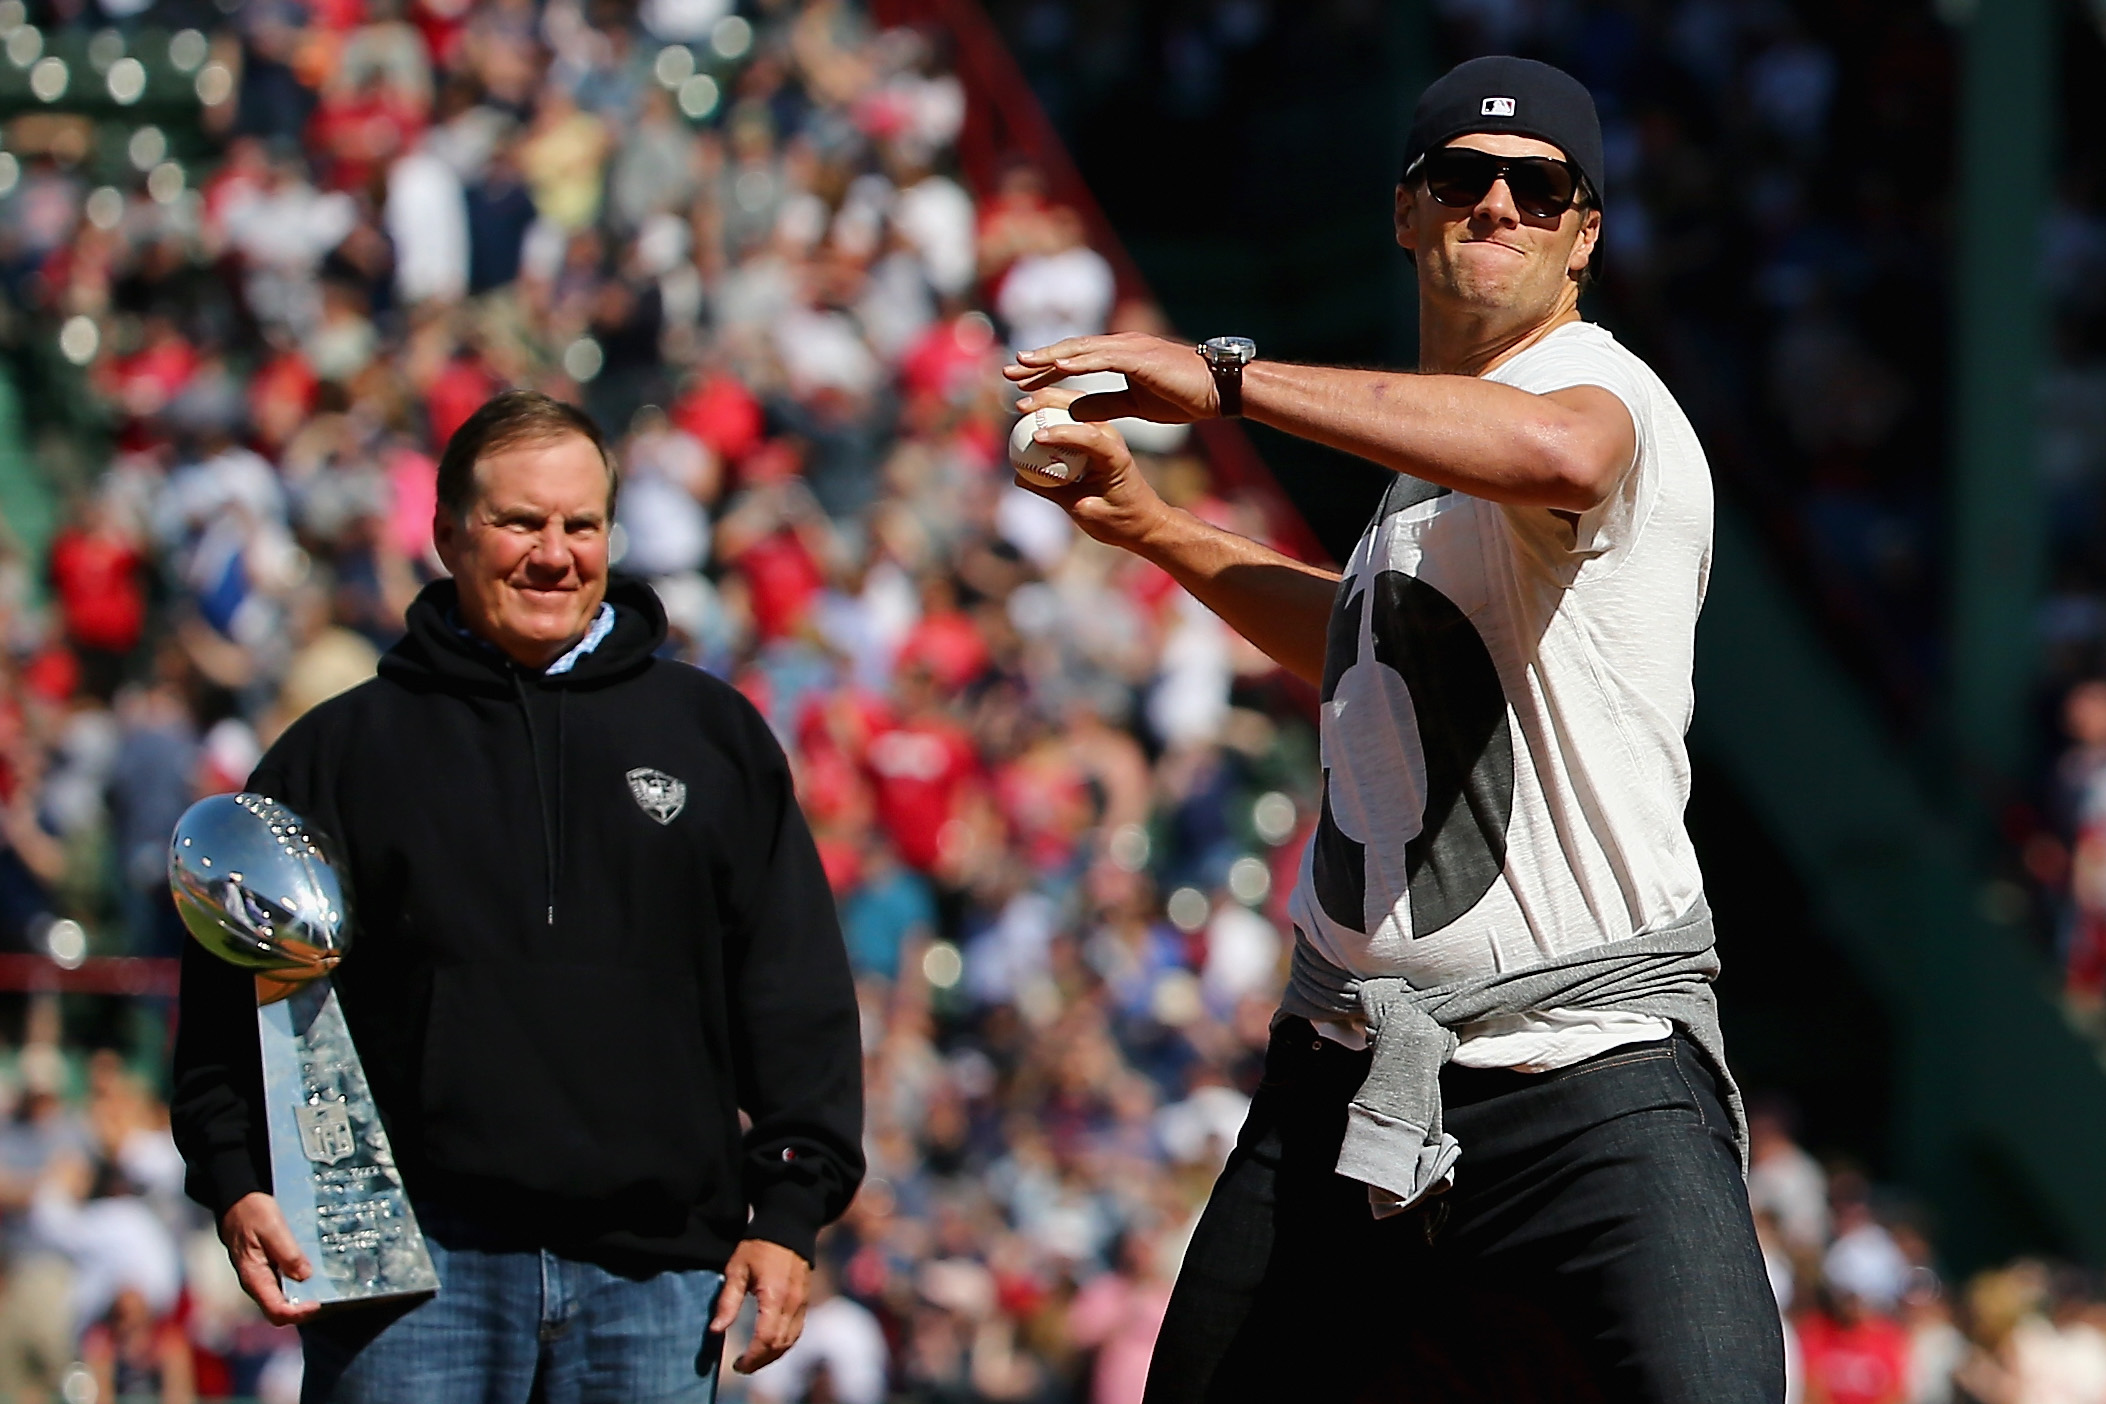 PHOTO: Patriots quarterback Tom Brady, right, threw out the ceremonial first pitch at the Boston Red Sox home opener, as Bill Belichick, left, looks on in Boston on April 13, 2015. 
